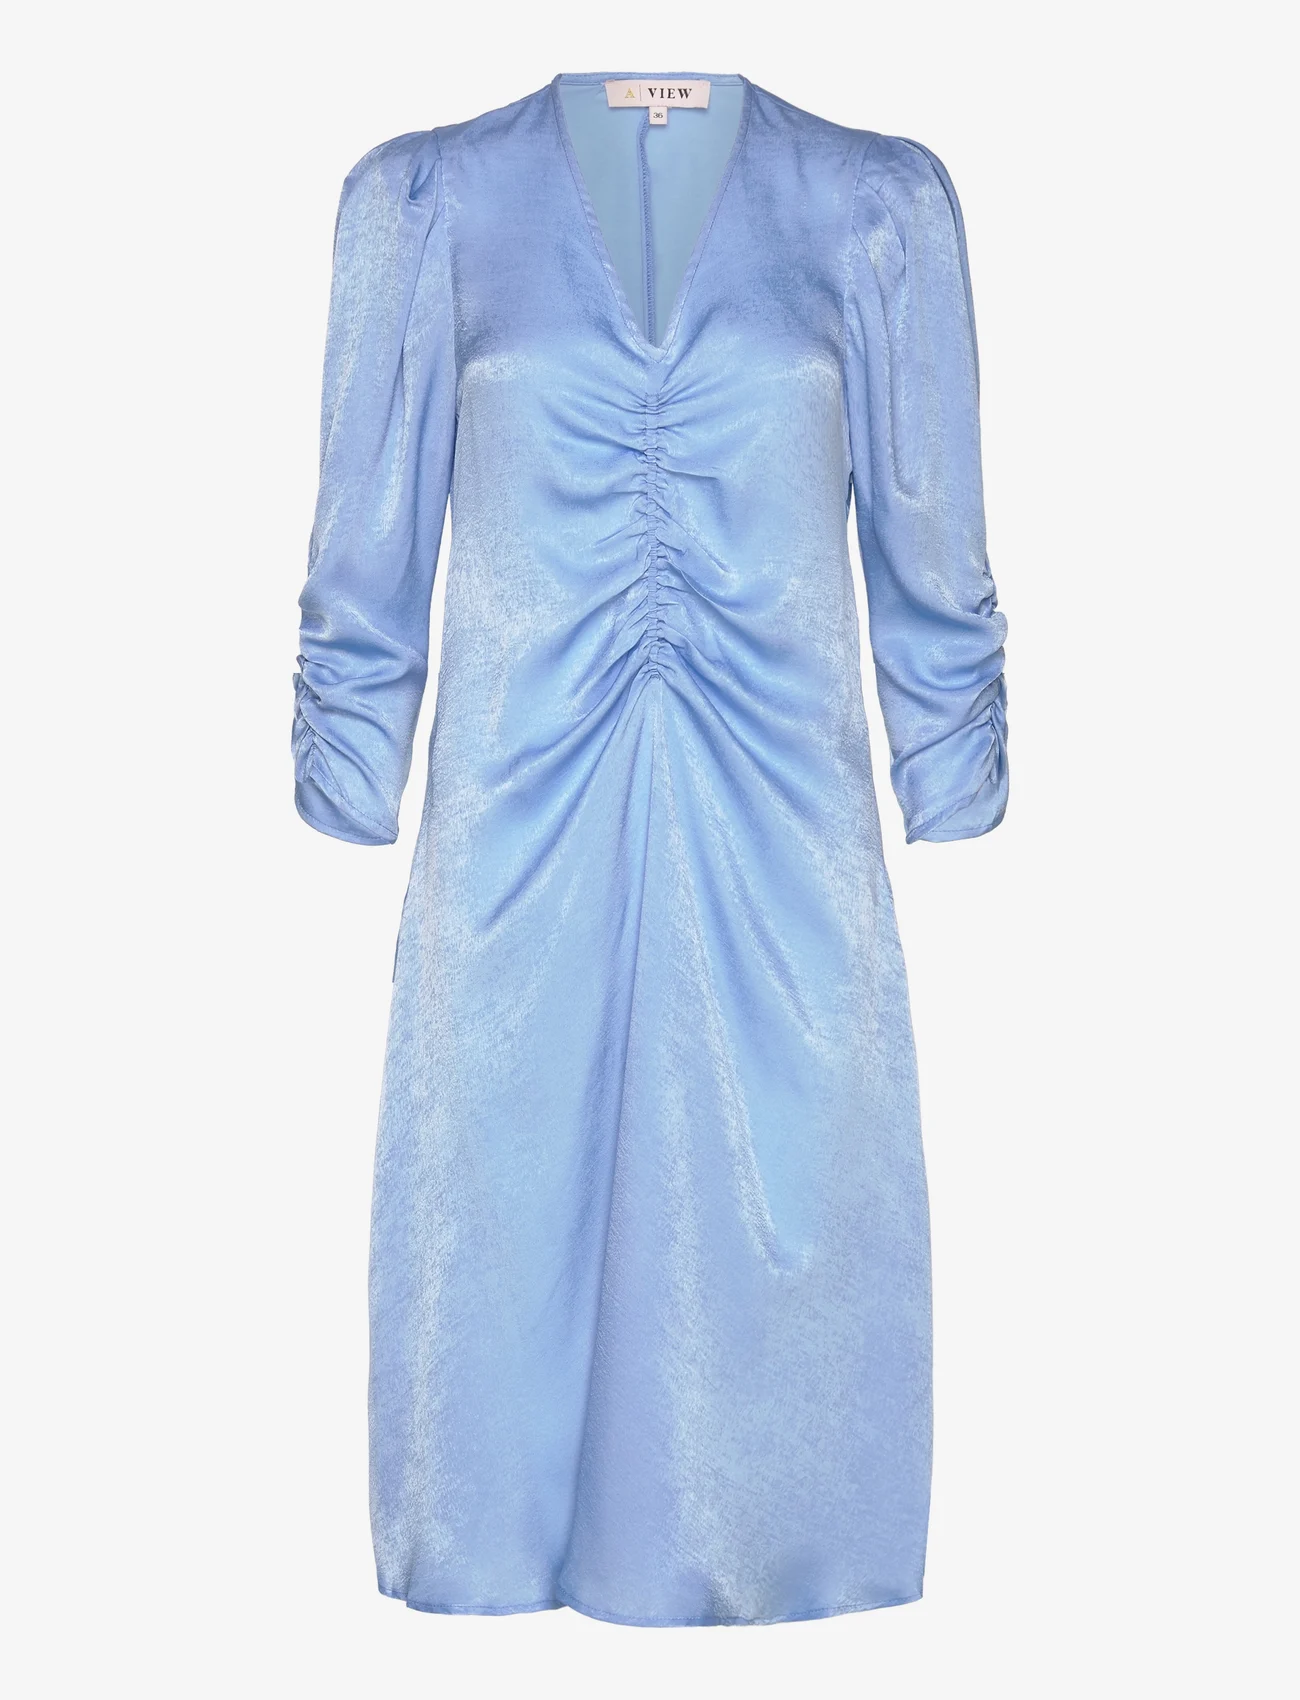 A-View - Evi dress - party wear at outlet prices - blue - 0